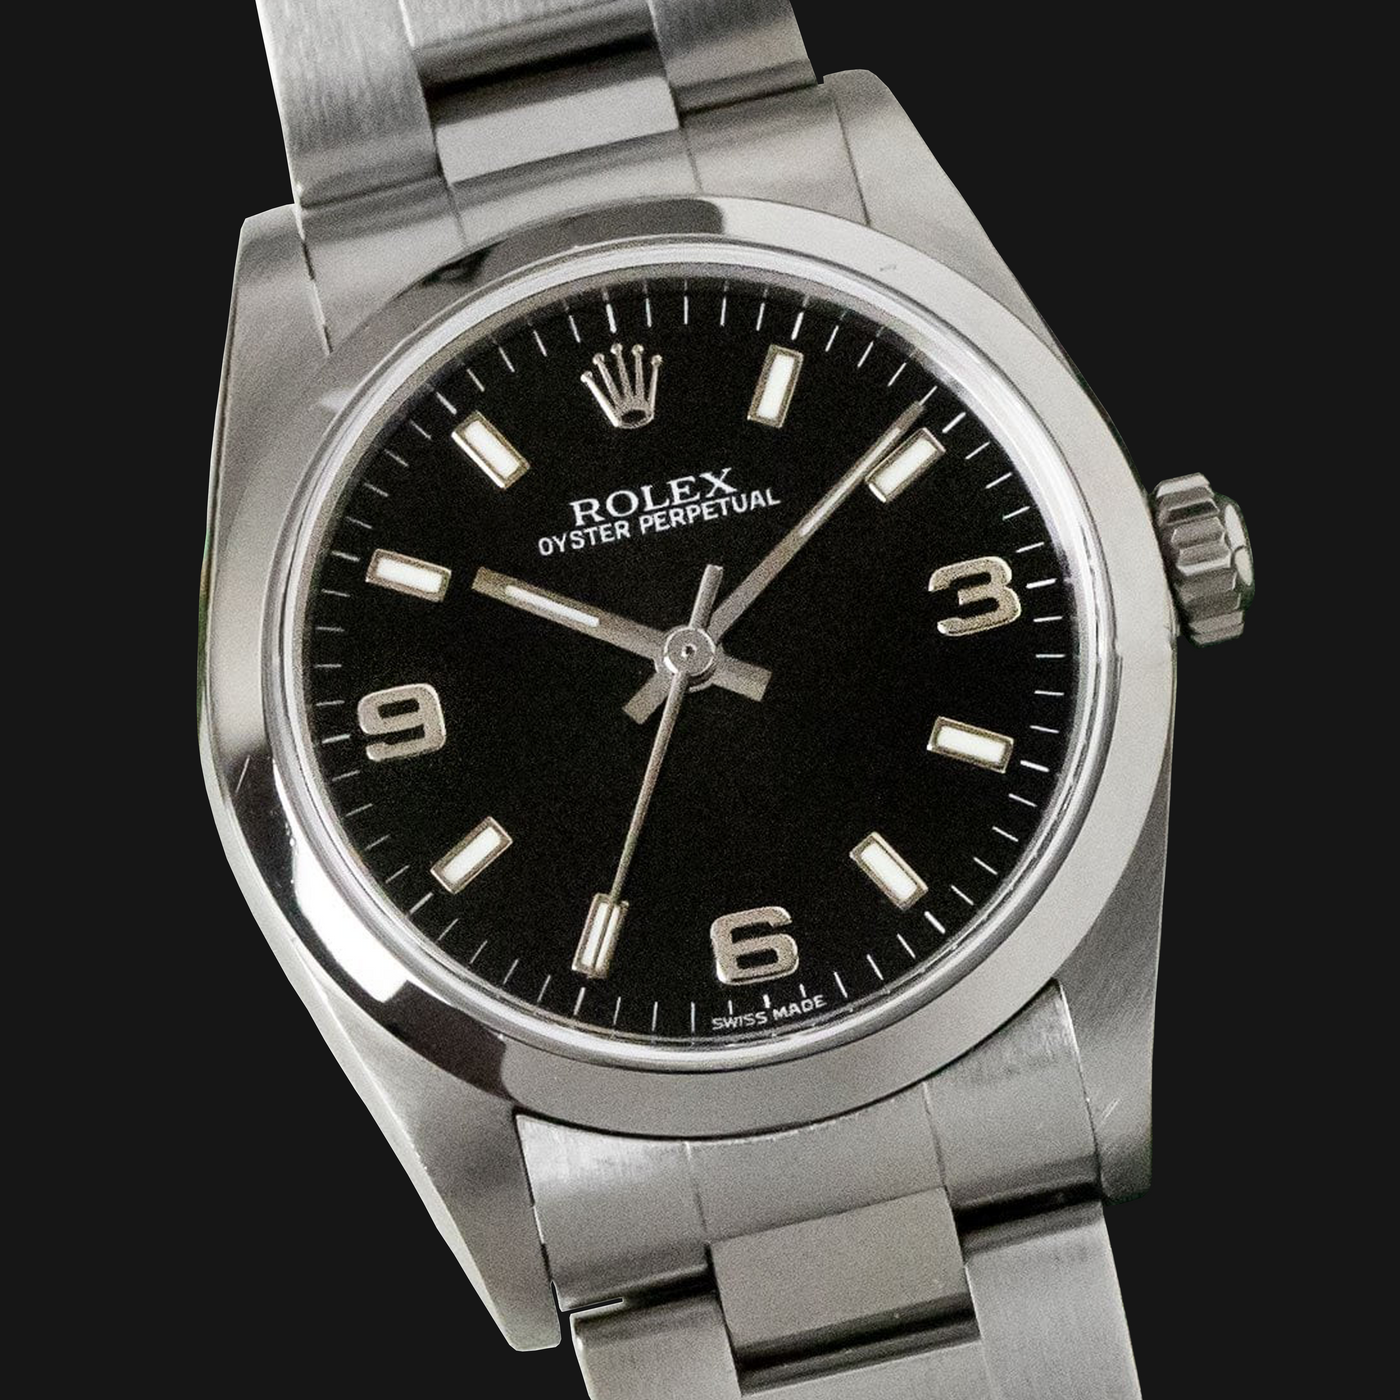 Rolex Oyster Perpetual 'On the Fly' Extension Link